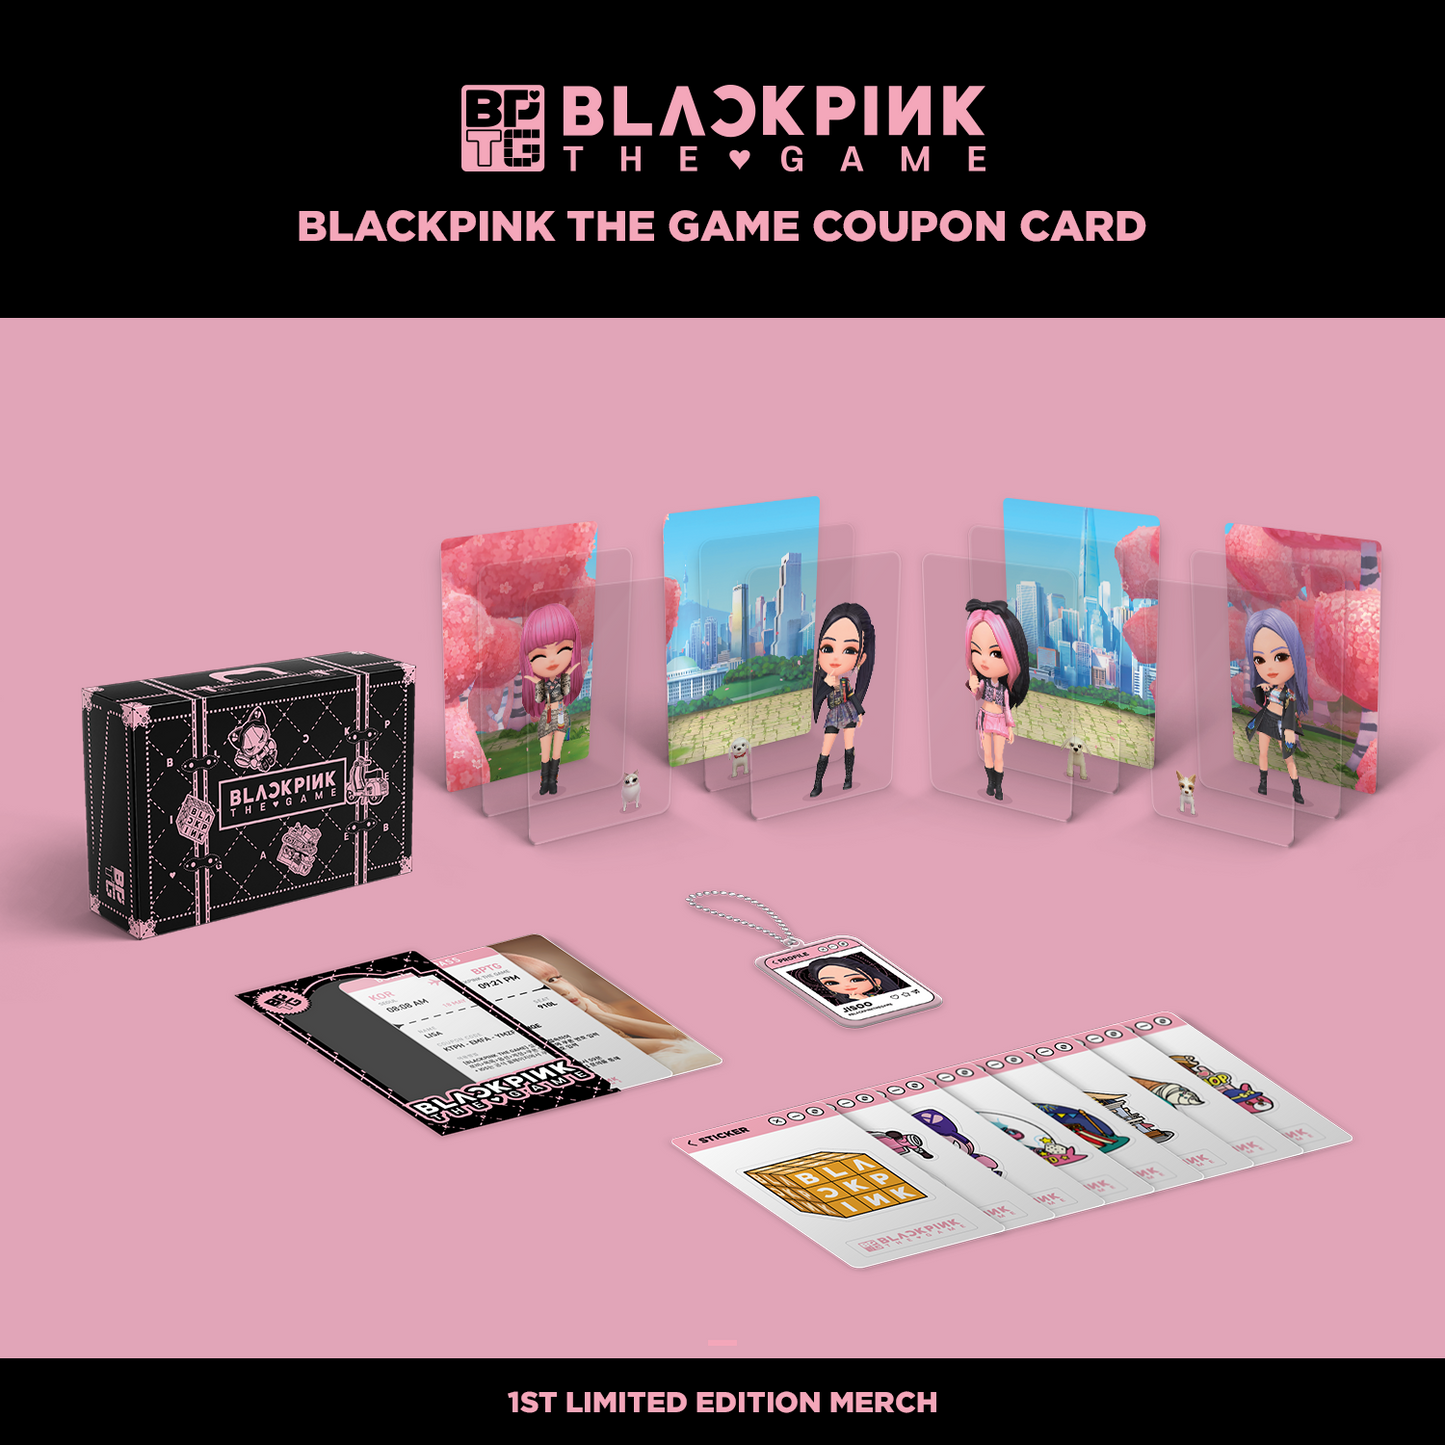 BLACKPINK THE GAME COUPON CARD COVER